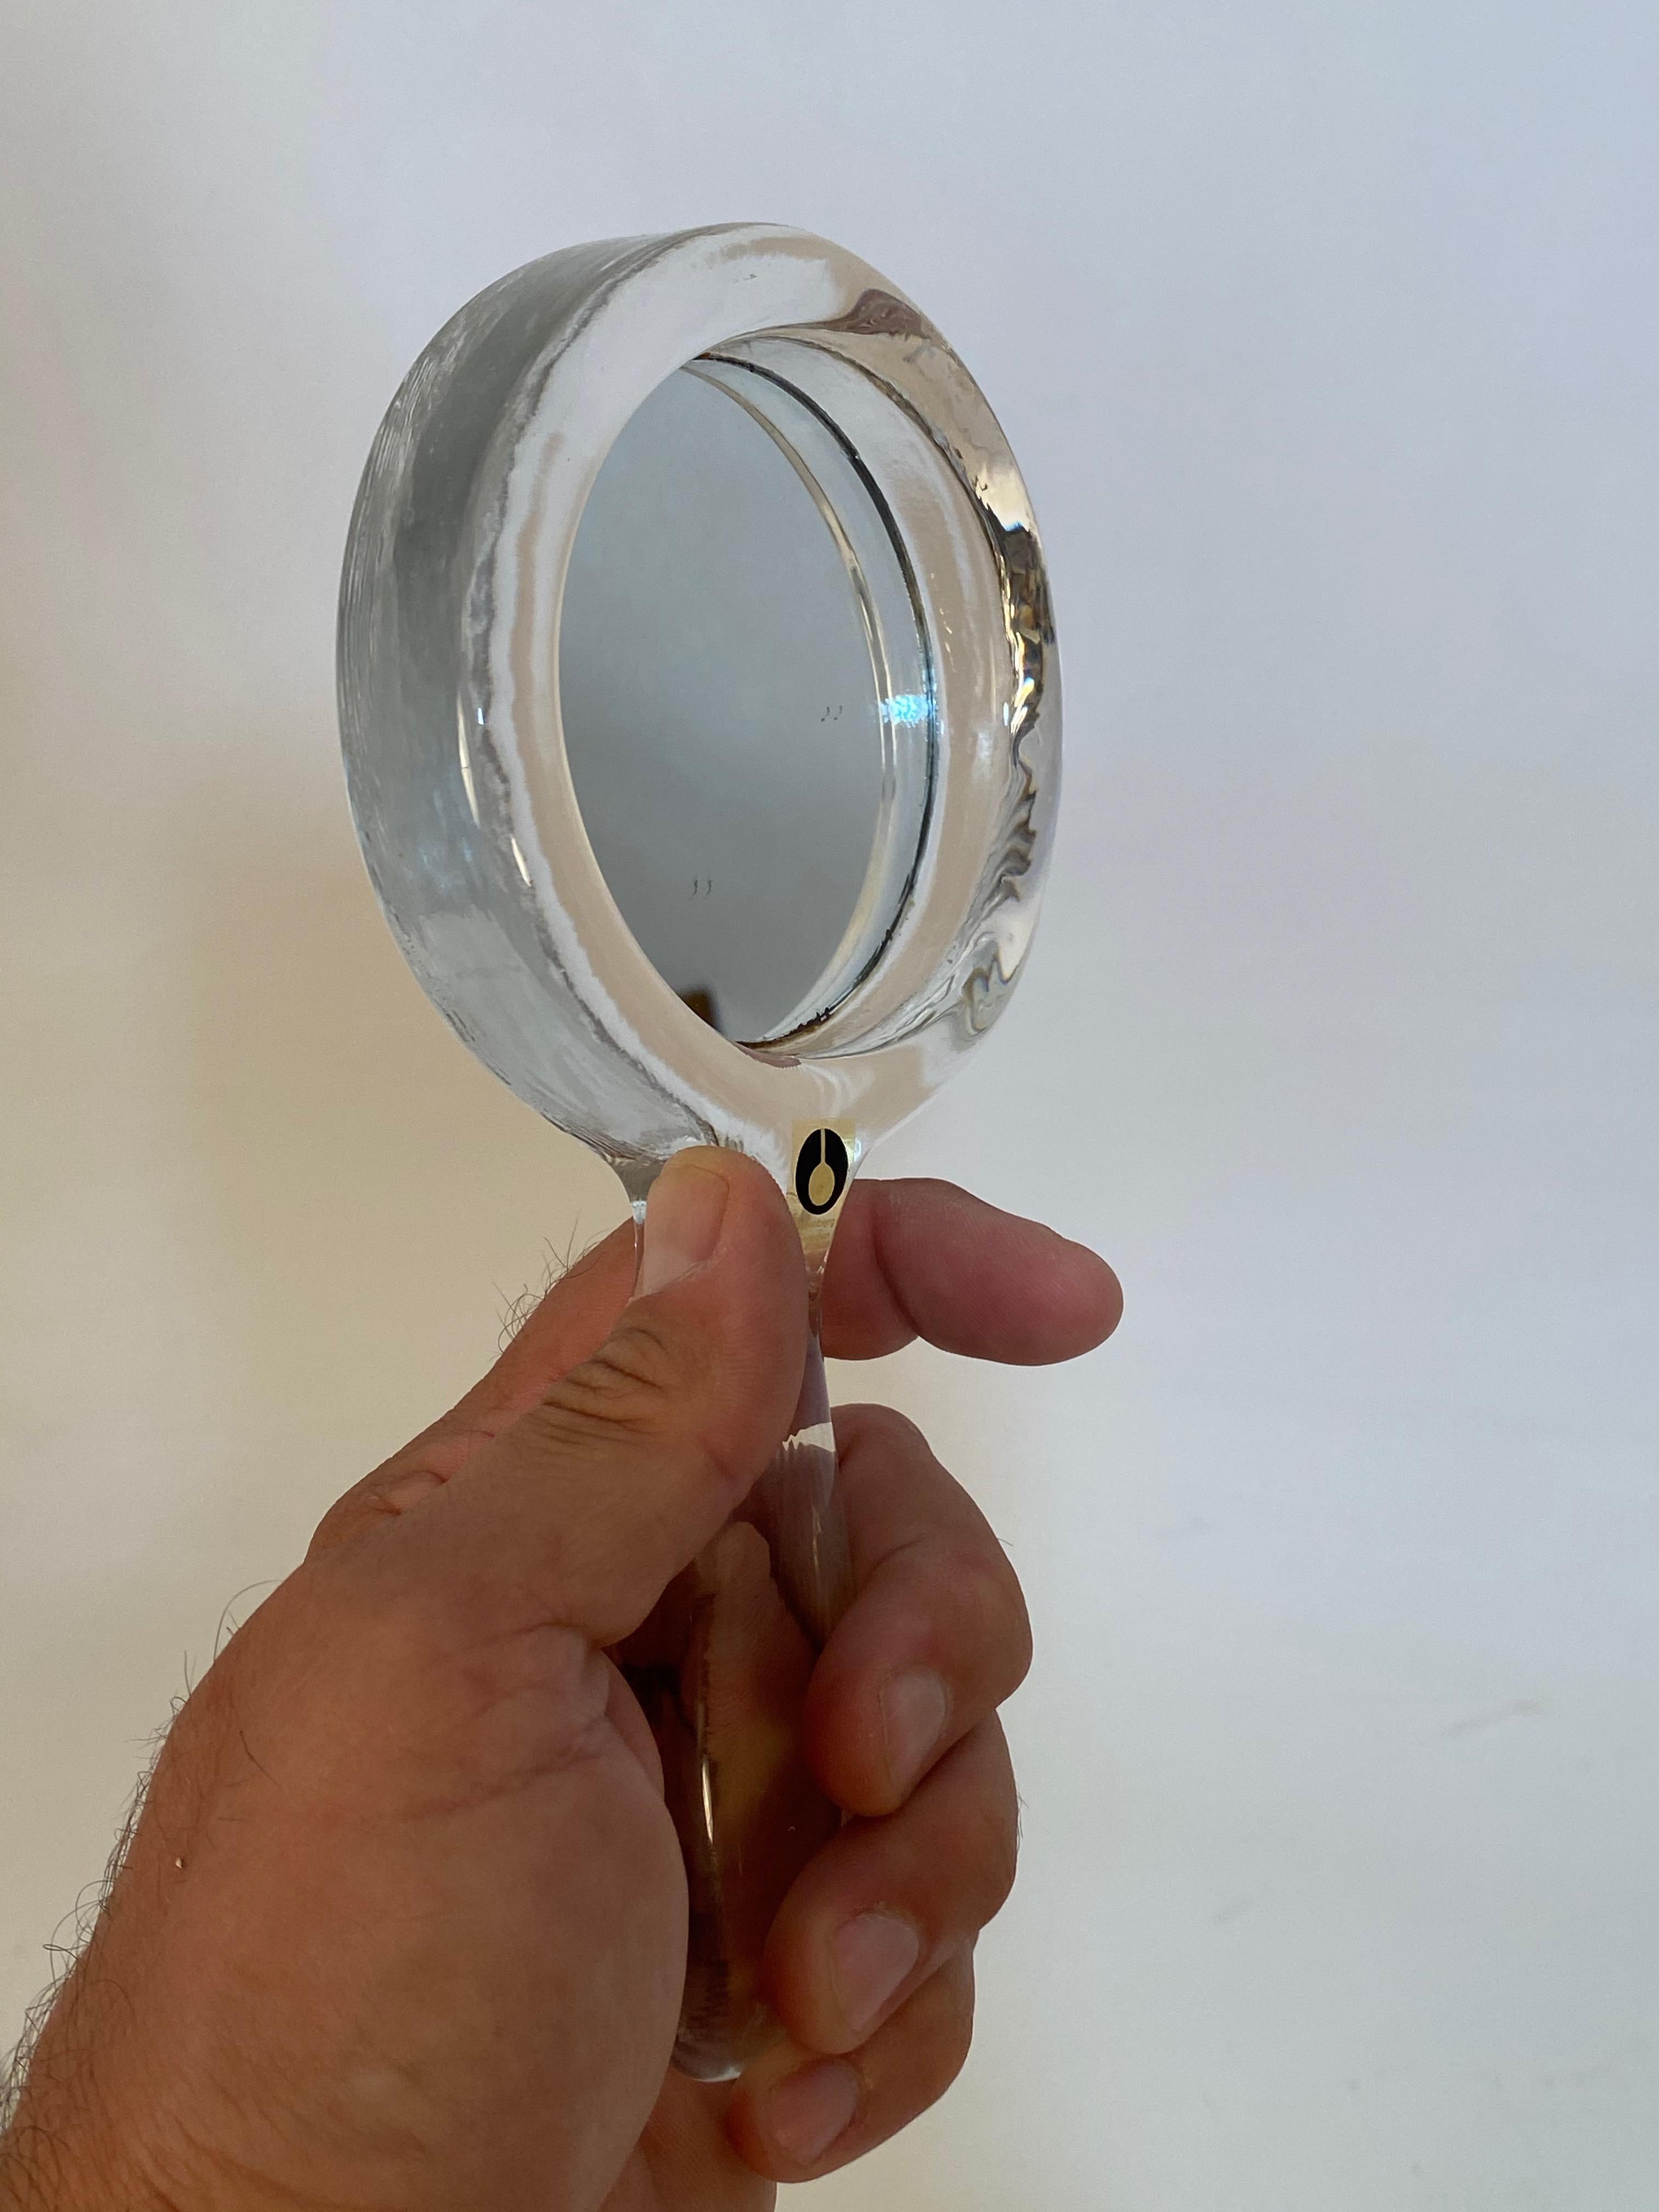 Signed clear molded glass hand mirror. Pukeberg, Sweden, circa 1960-1970. Very good condition with no cracks, chips or scratches to mirrored glass.

Measures: Approximately 4